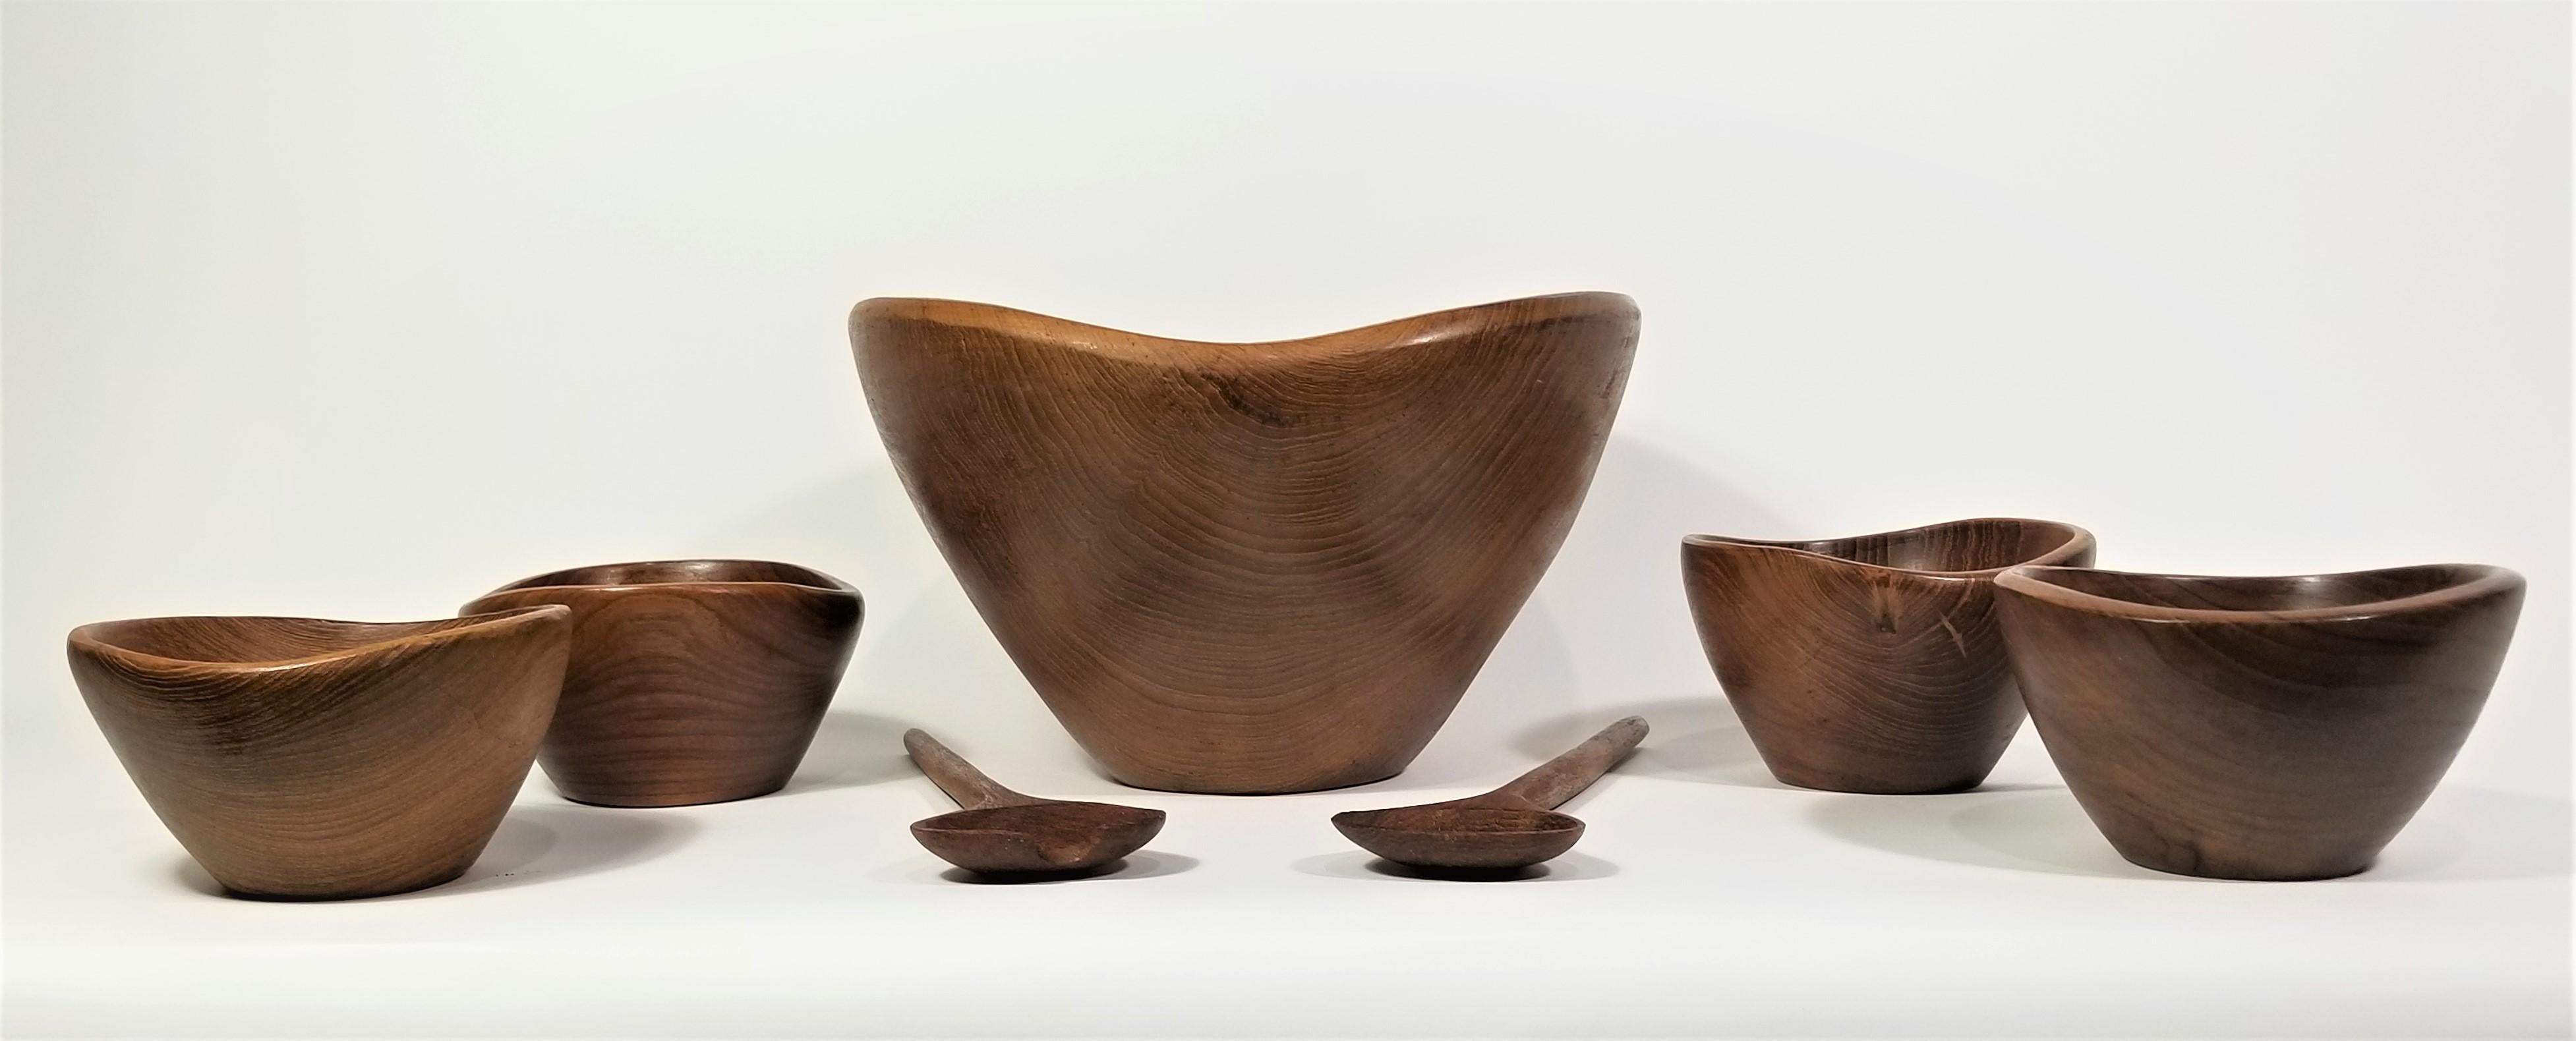 Mid century 1960s teak hand turned bowl set.  1 large bowl and 4 small bowls with utensils. 

Measurements:
Salad bowl height: 7.5 inches
Salad bowl diameter: 12.0 inches

Small bowls height: 3.25
Small bowls diameter: 5.75 inches

Salad spoons